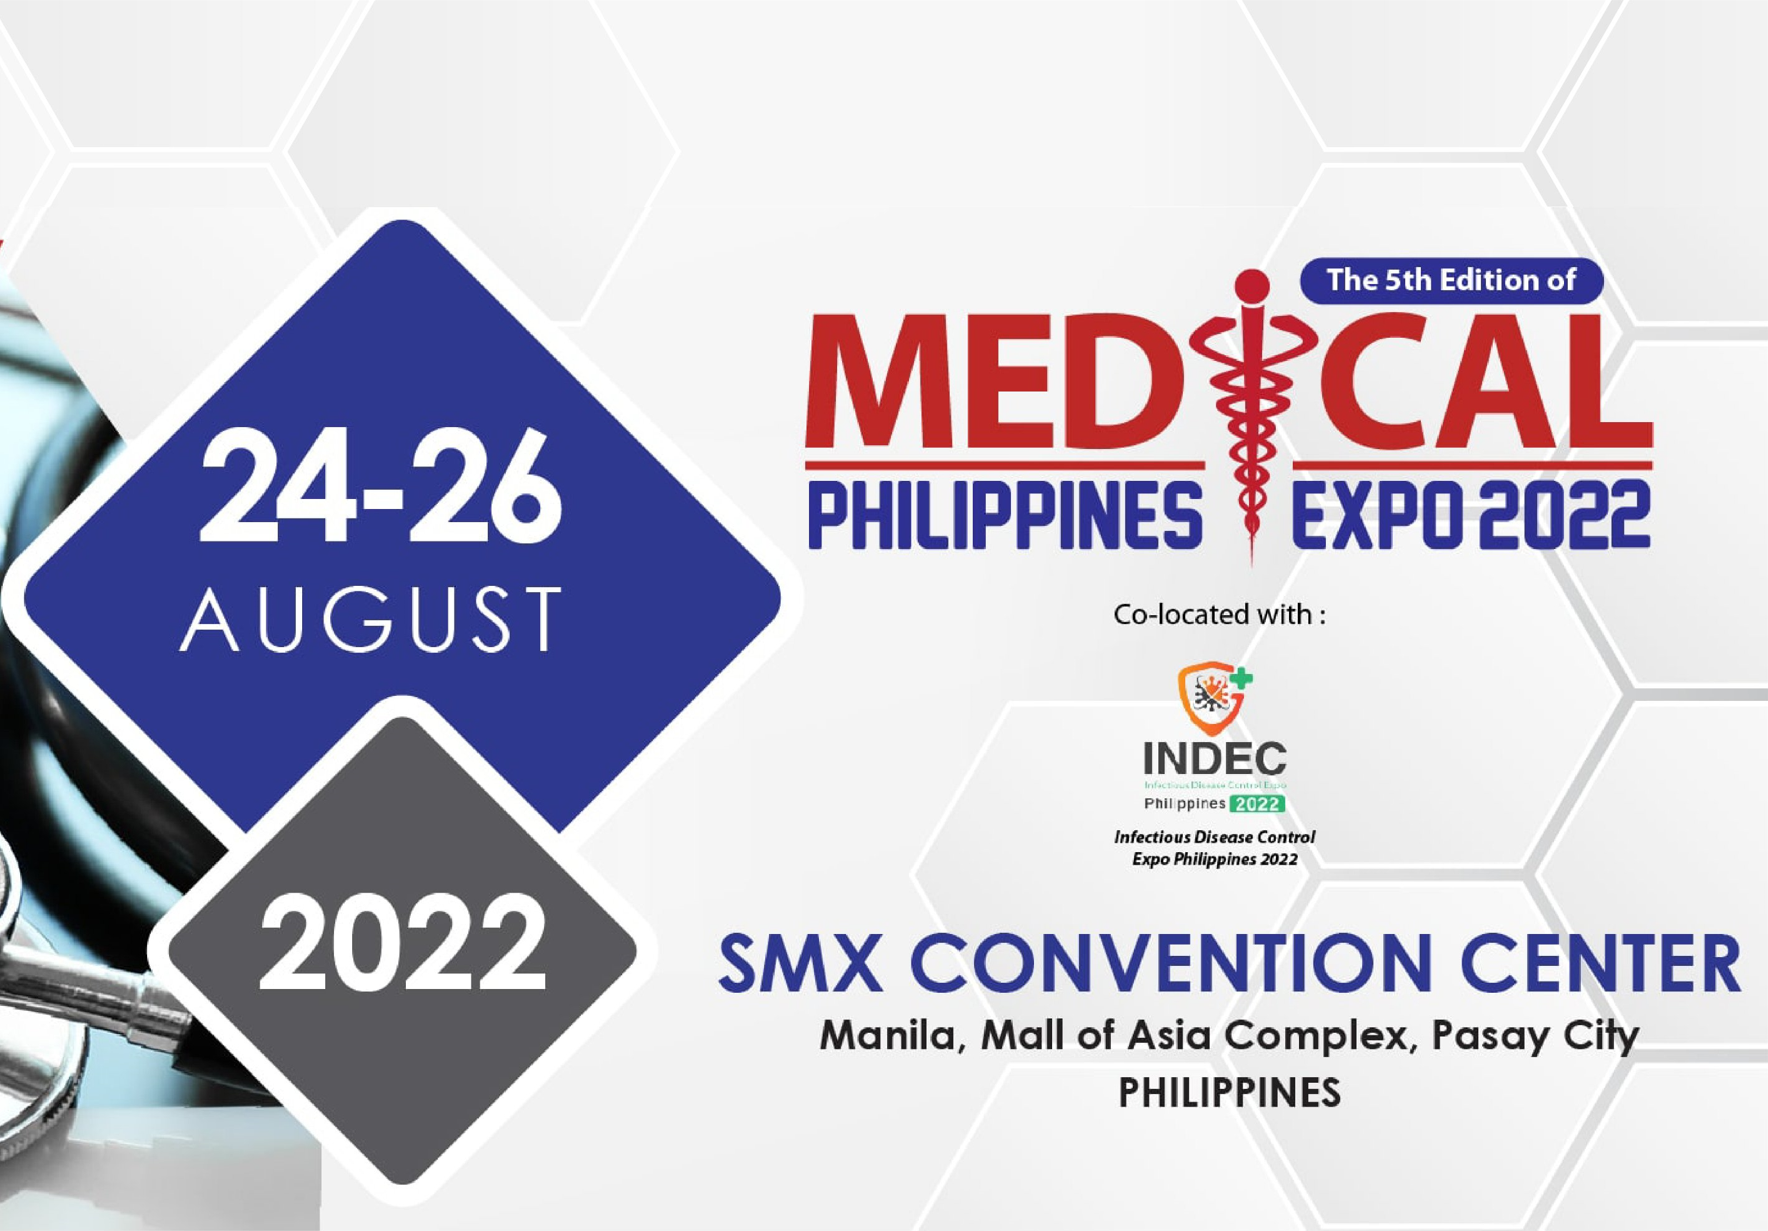 Medlander Showed Its Cutting-Edge Innovation at Medical Philippines Expo 2022